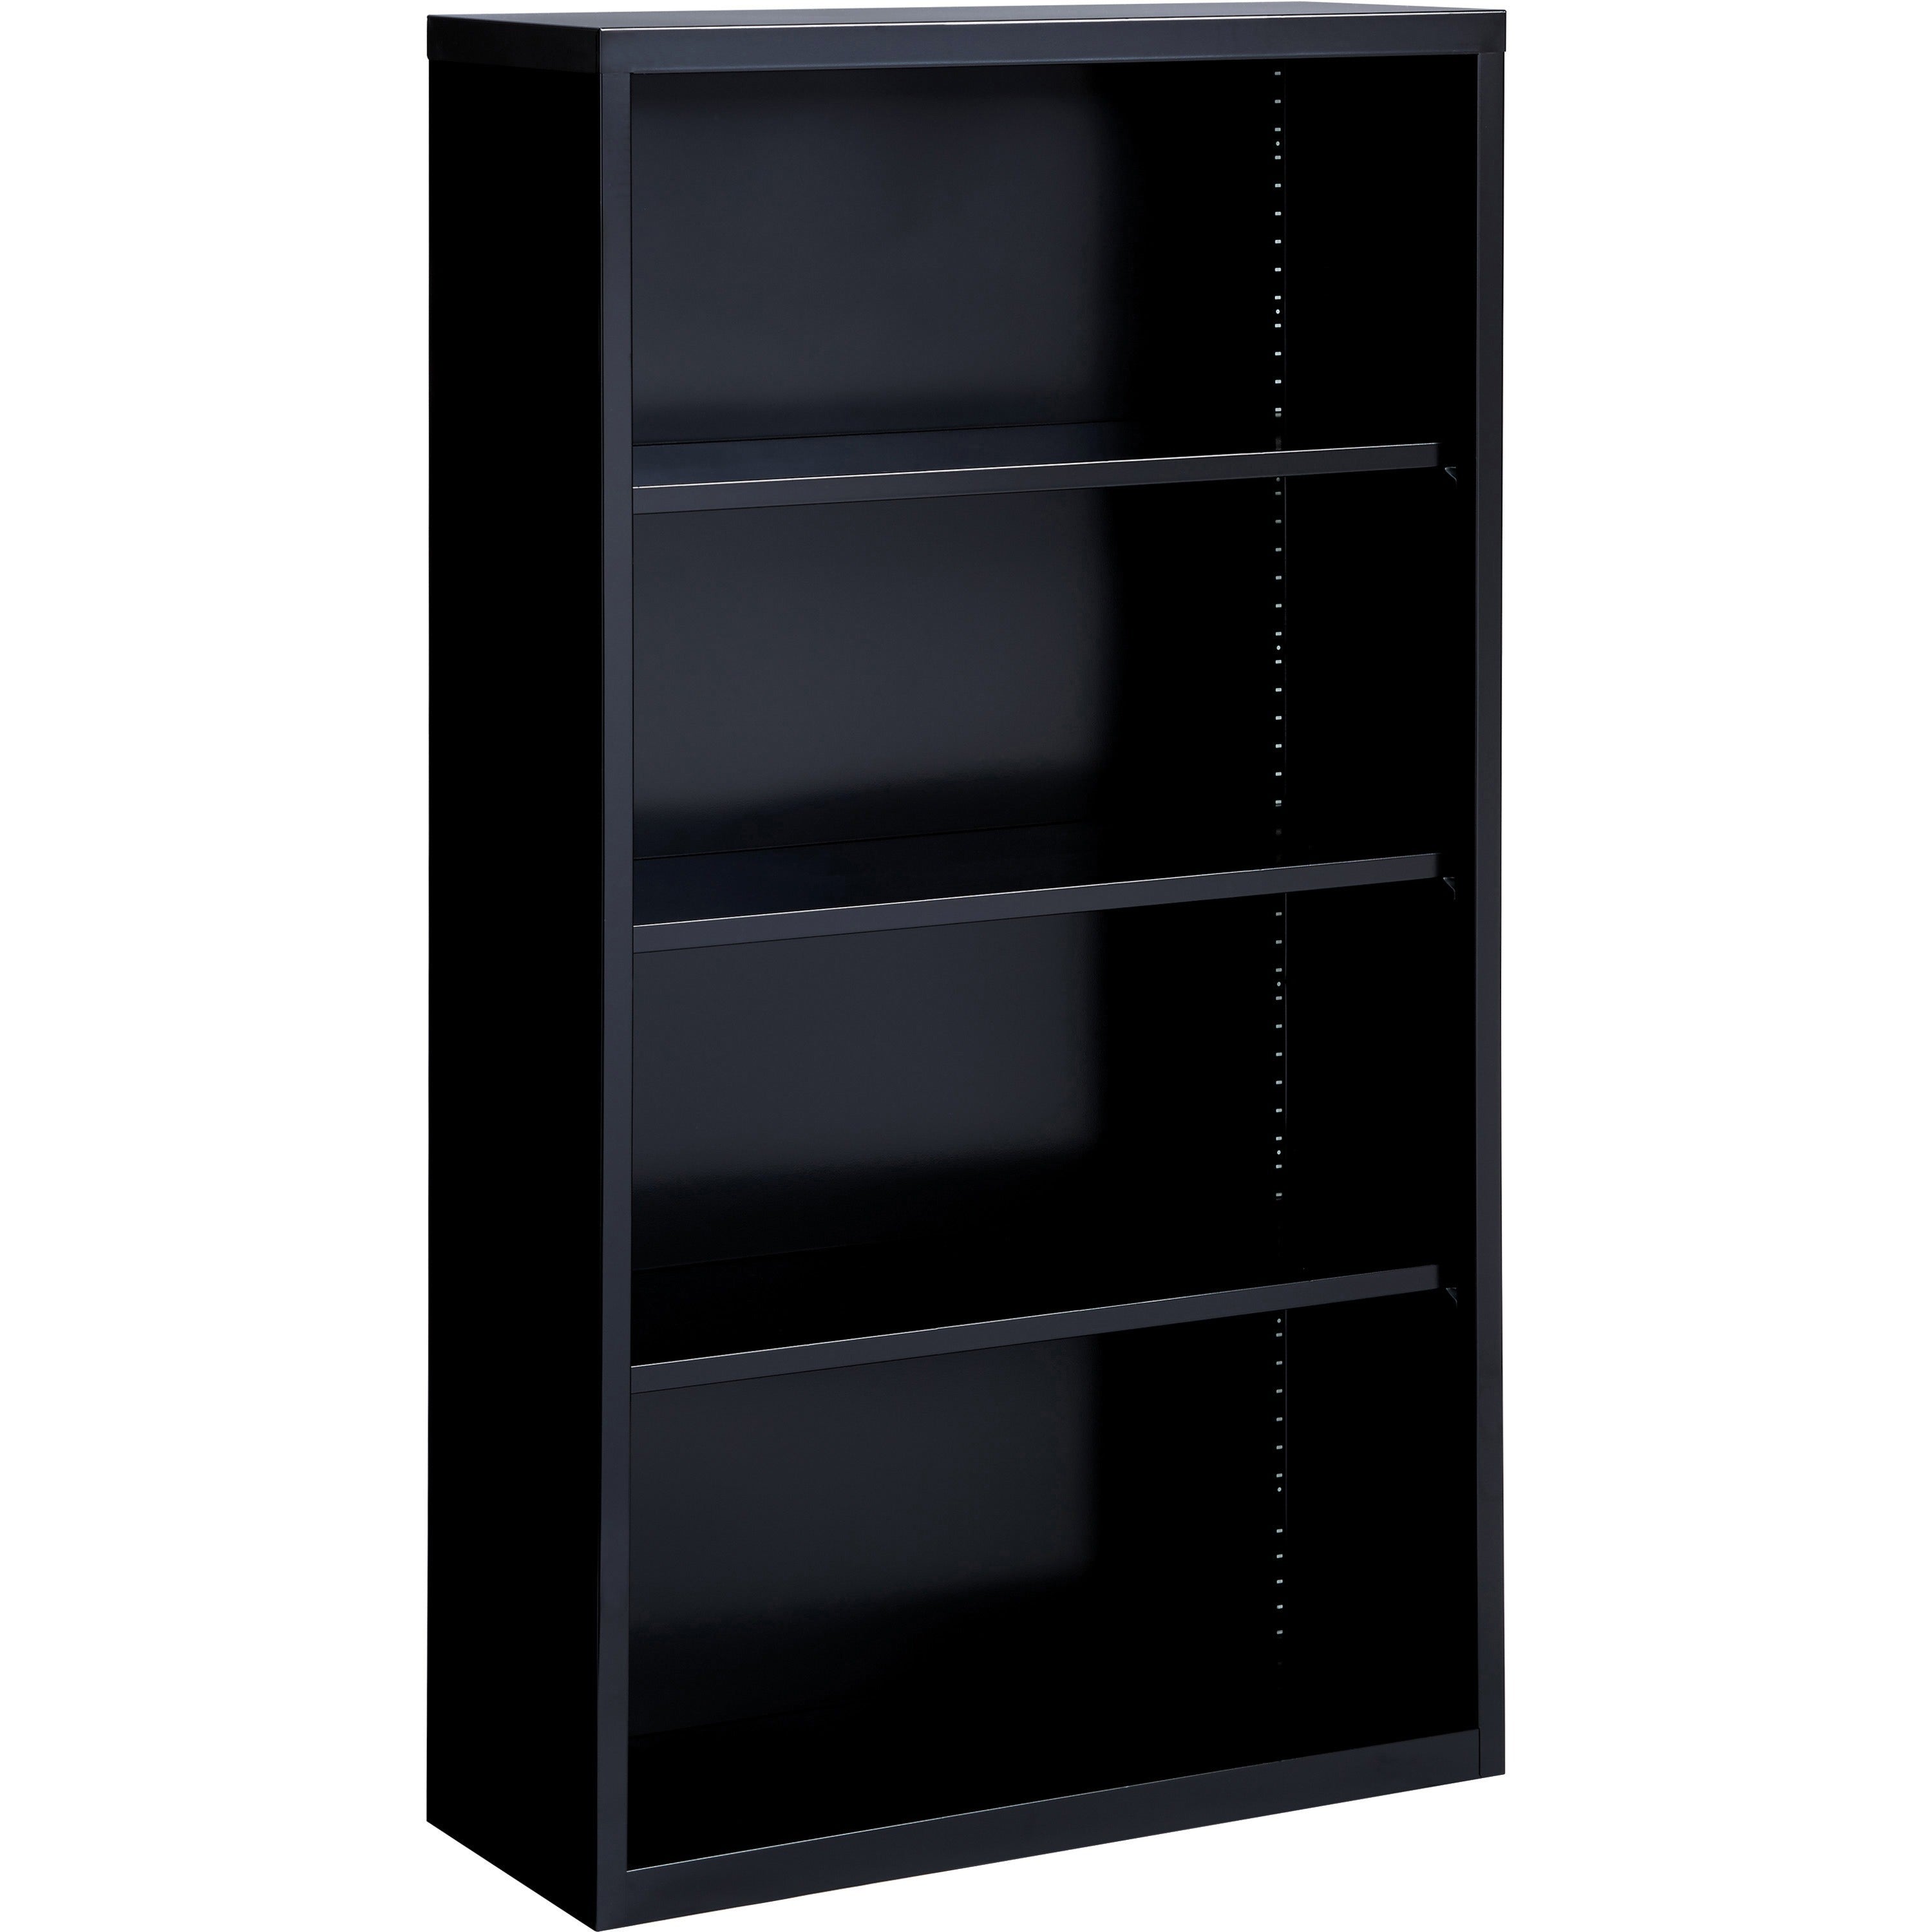 Lorell Fortress Series Bookcase - 34.5" x 13" x 60" - 4 x Shelf(ves) - Black - Powder Coated - Steel - Recycled - 